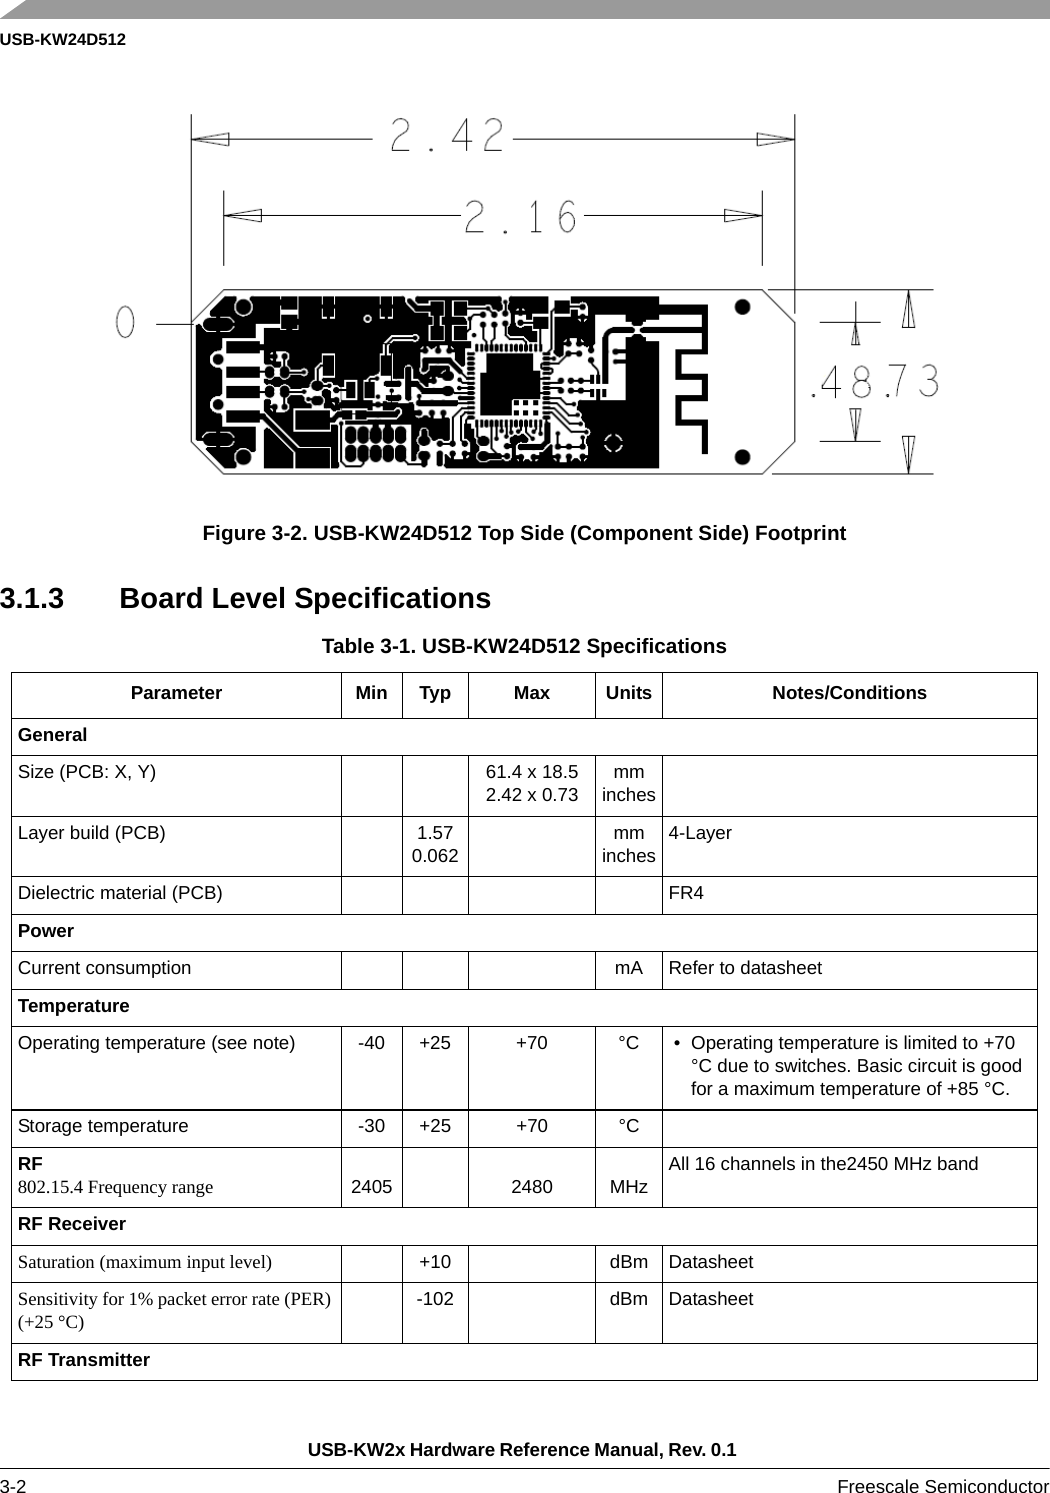 USB-KW24D512USB-KW2x Hardware Reference Manual, Rev. 0.1 3-2 Freescale Semiconductor Figure 3-2. USB-KW24D512 Top Side (Component Side) Footprint3.1.3 Board Level SpecificationsTable 3-1. USB-KW24D512 SpecificationsParameter Min Typ Max Units Notes/ConditionsGeneralSize (PCB: X, Y) 61.4 x 18.52.42 x 0.73mminchesLayer build (PCB) 1.570.062mminches4-LayerDielectric material (PCB) FR4PowerCurrent consumption mA Refer to datasheetTemperatureOperating temperature (see note) -40 +25 +70 °C  • Operating temperature is limited to +70 °C due to switches. Basic circuit is good for a maximum temperature of +85 °C.Storage temperature -30 +25 +70 °CRF 802.15.4 Frequency range 2405 2480 MHzAll 16 channels in the2450 MHz bandRF ReceiverSaturation (maximum input level) +10 dBm DatasheetSensitivity for 1% packet error rate (PER) (+25 °C) -102 dBm DatasheetRF Transmitter